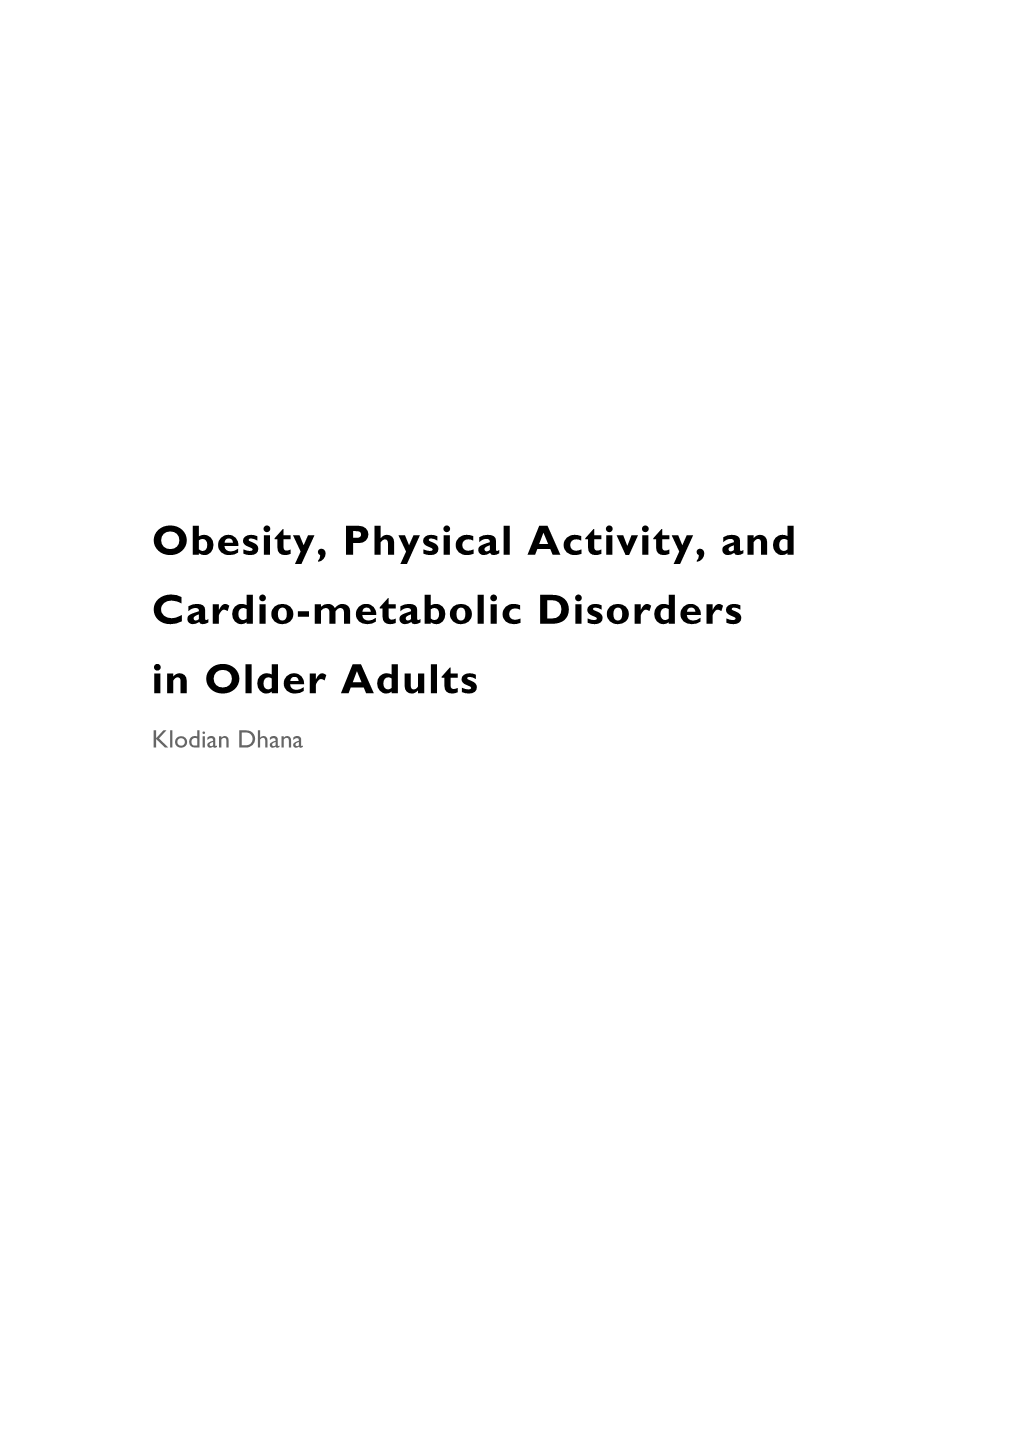 Obesity, Physical Activity, and Cardio-Metabolic Disorders in Older Adults Klodian Dhana